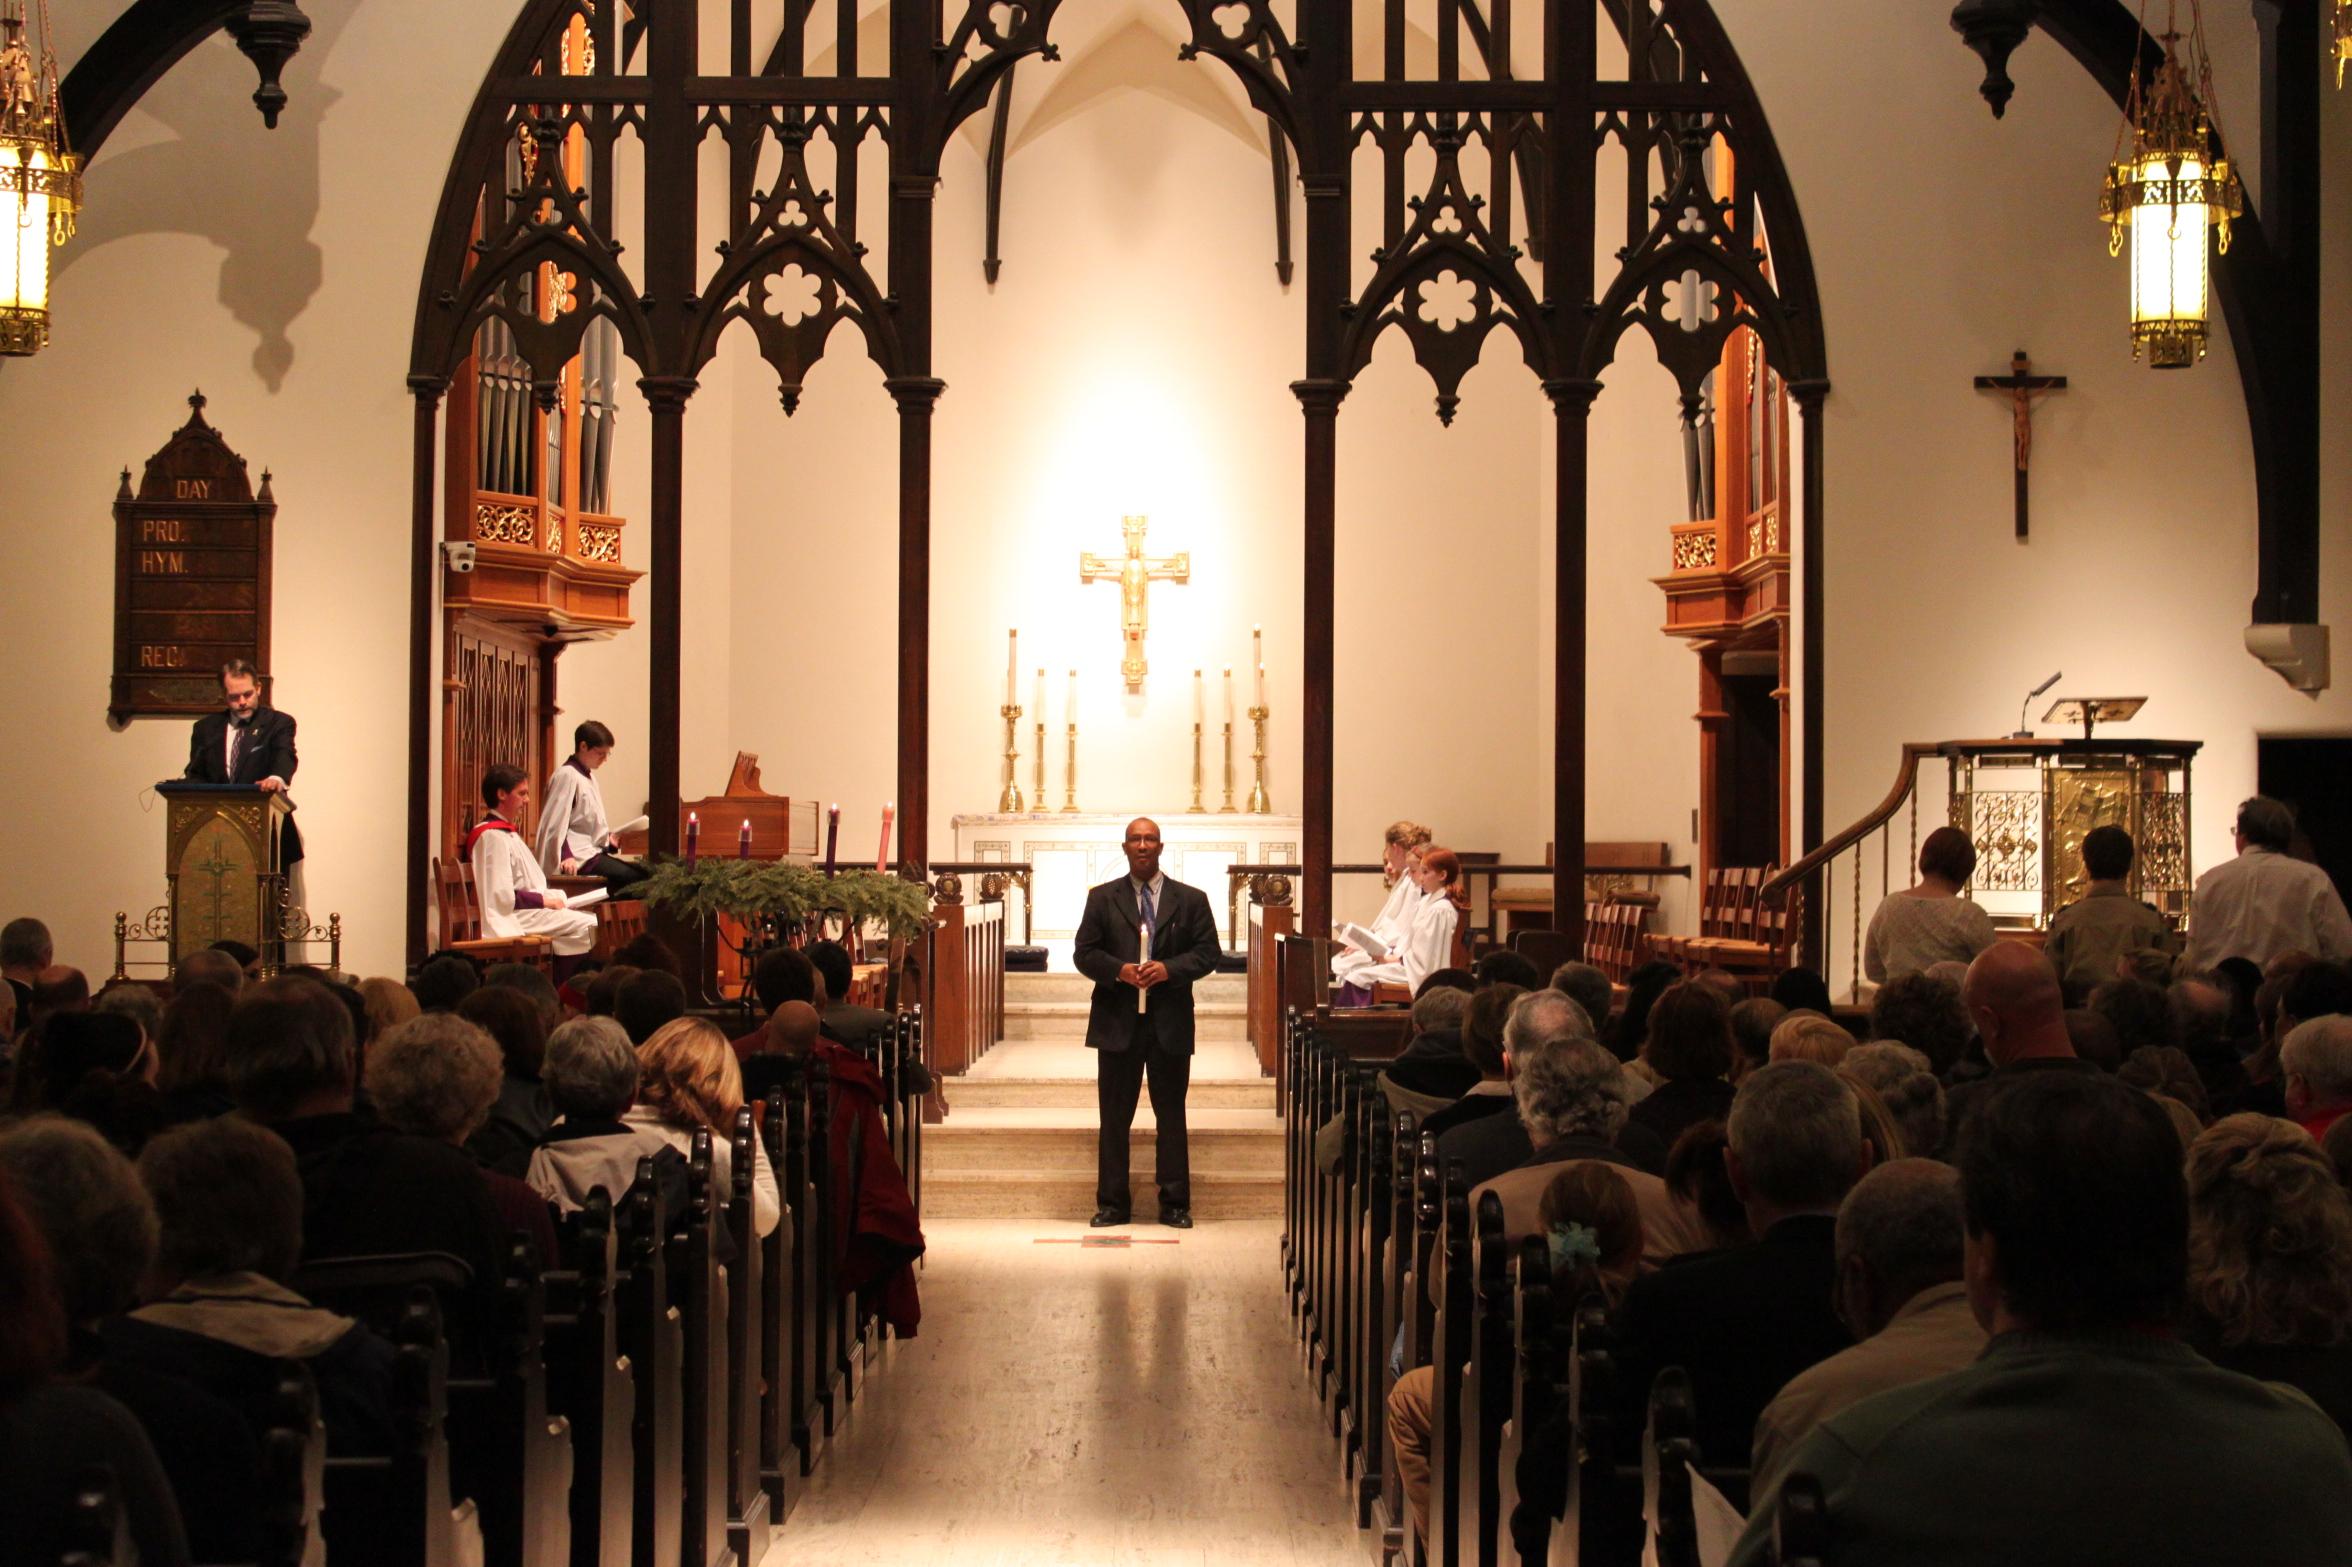 People fill the pews of a church. A man stands at the front holding a candle.